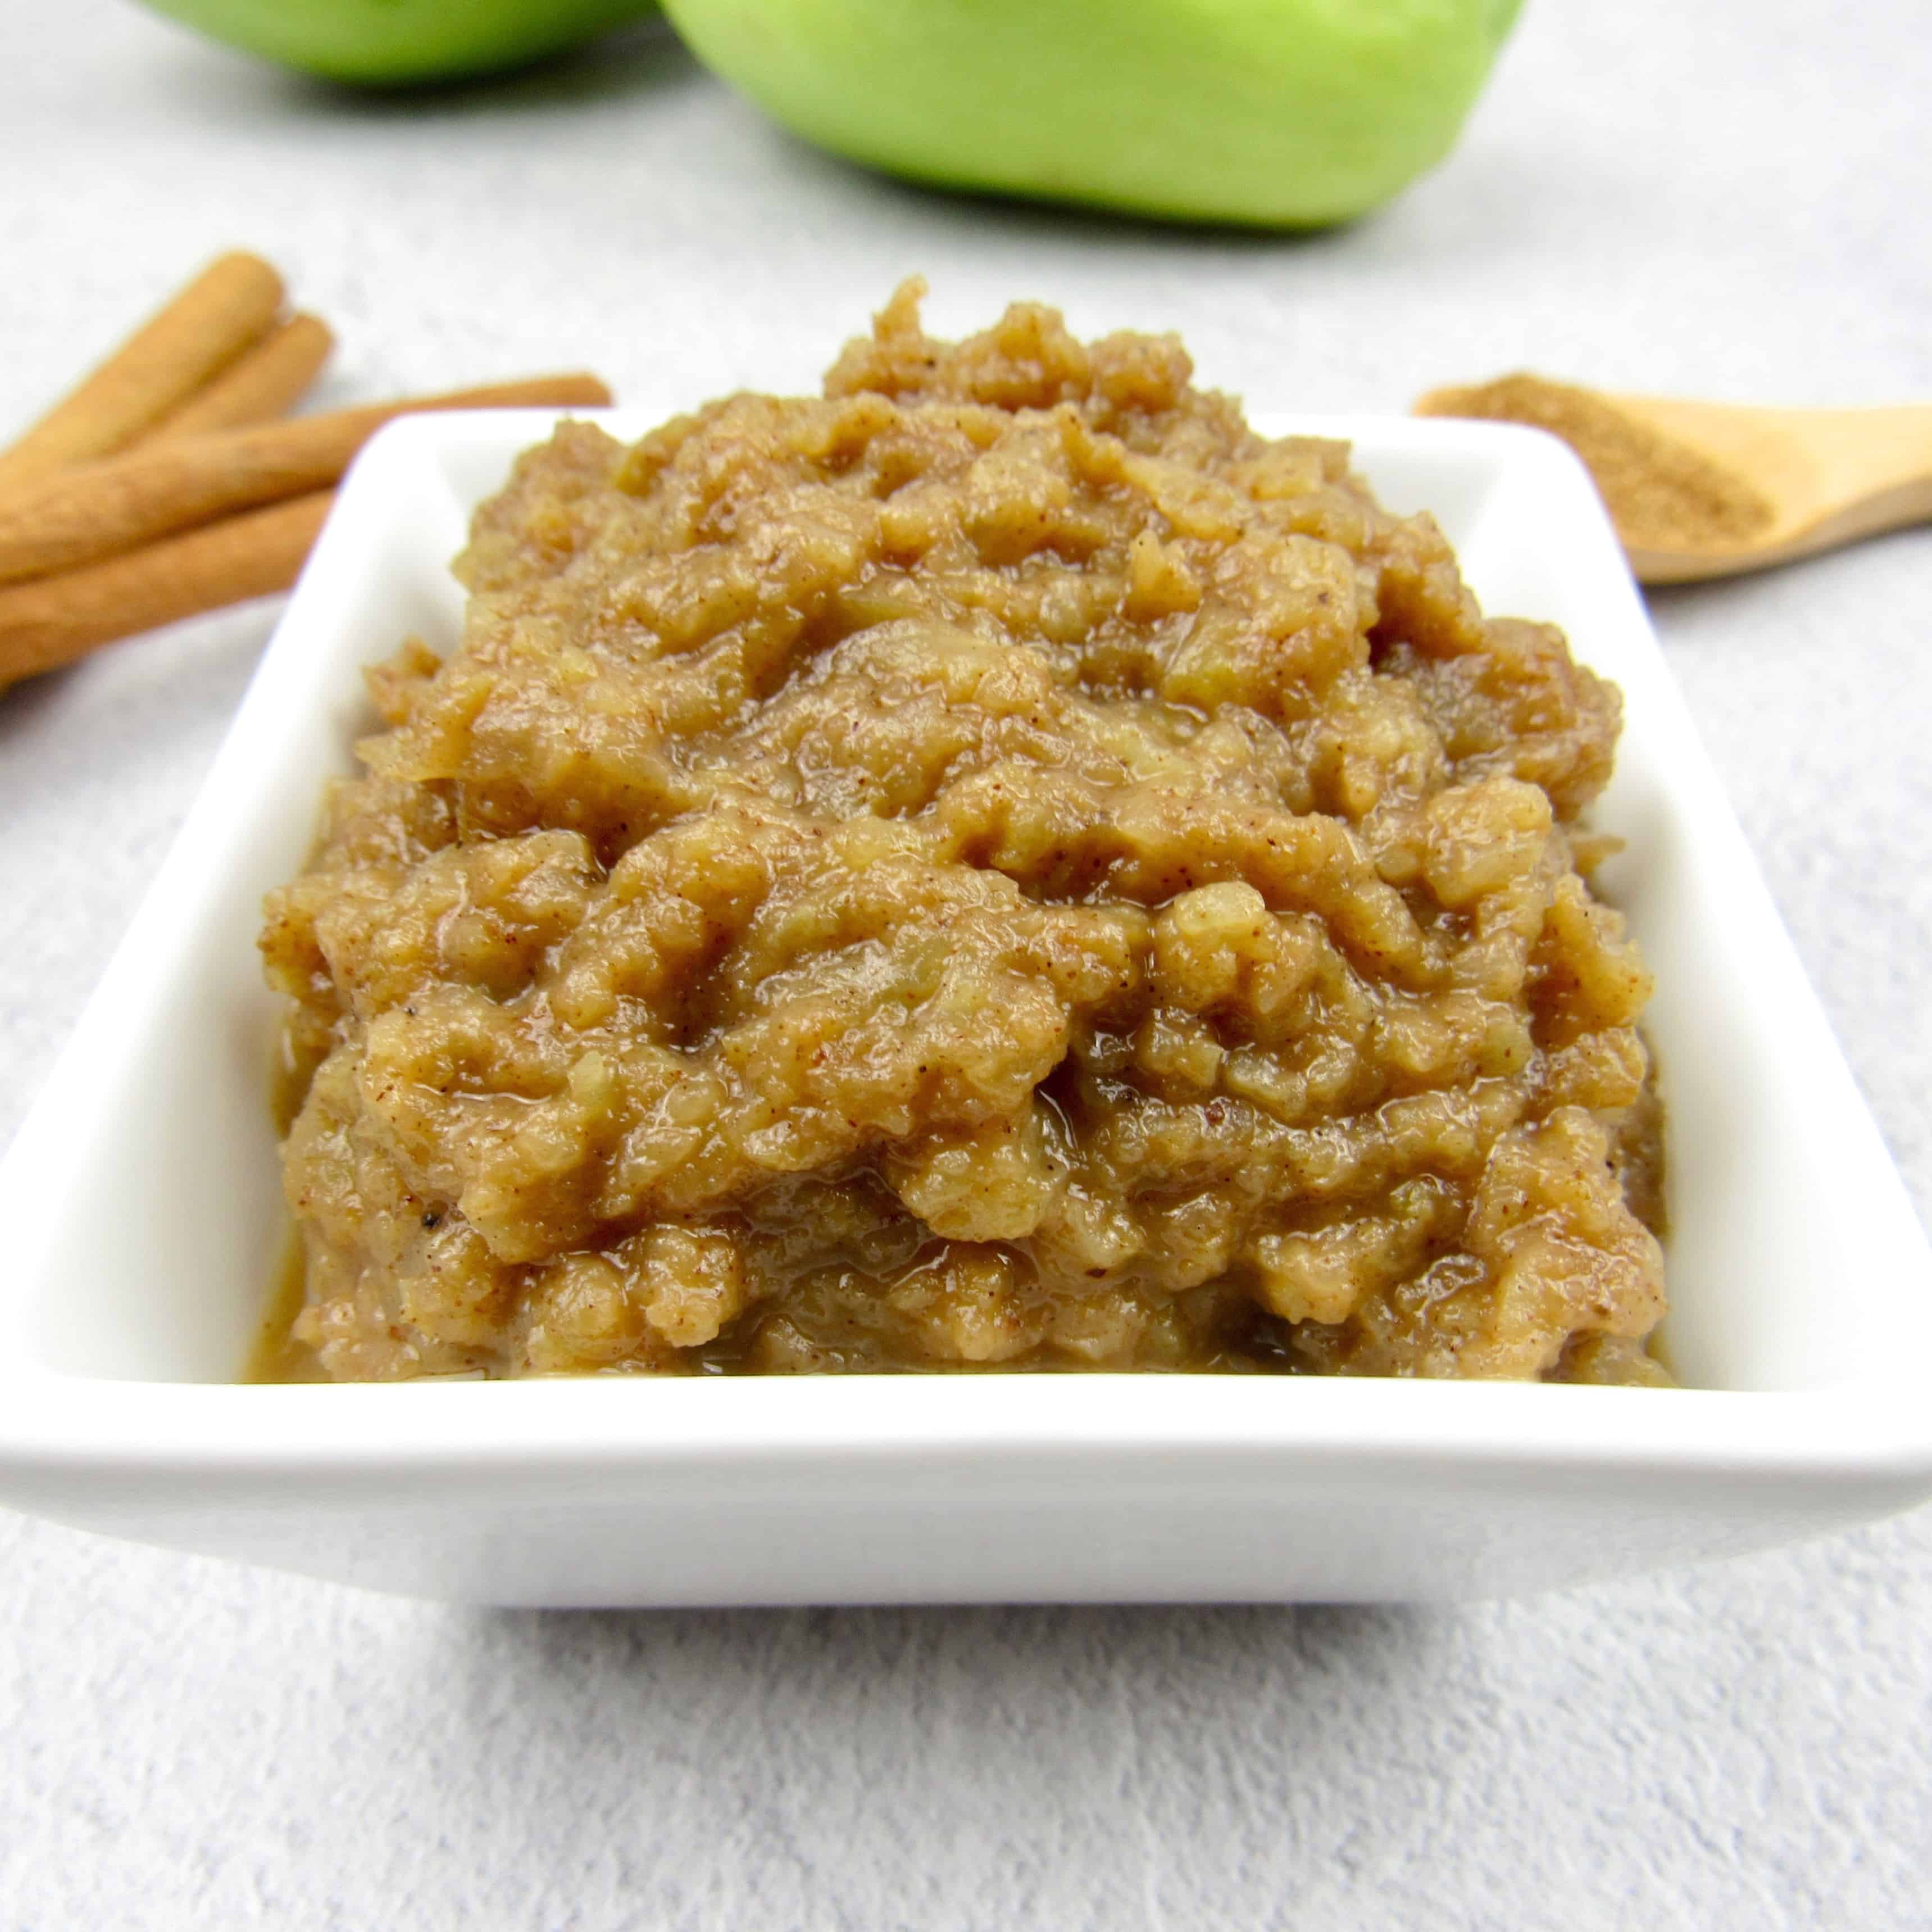 mock applesauce in white square dish with chayote squash in background